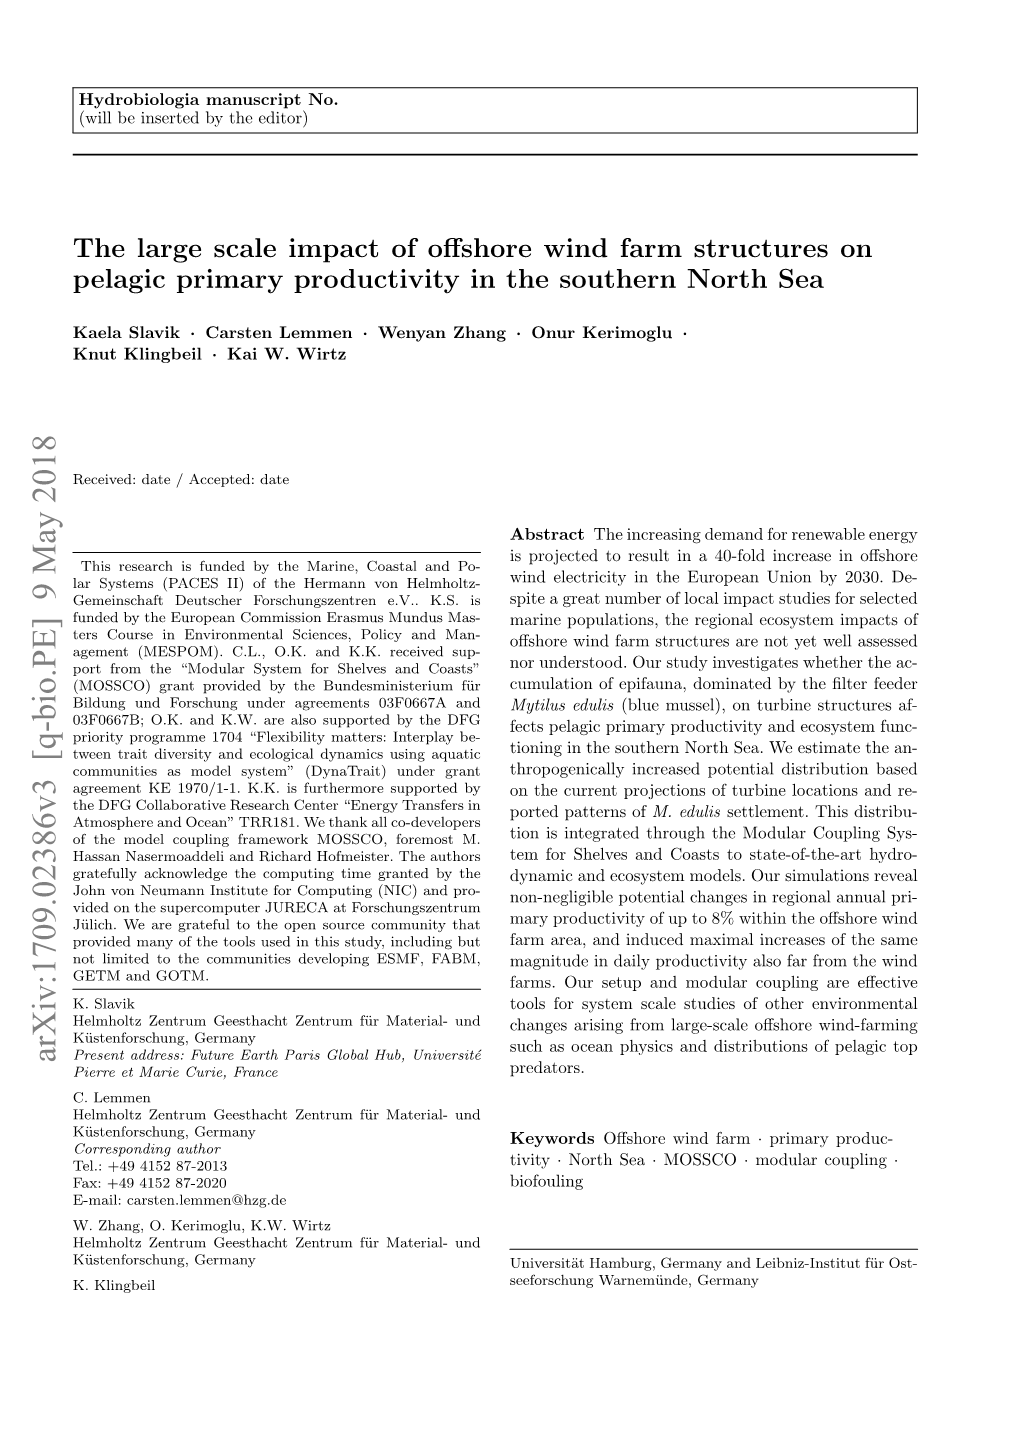 The Large Scale Impact of Offshore Wind Farm Structures on Pelagic